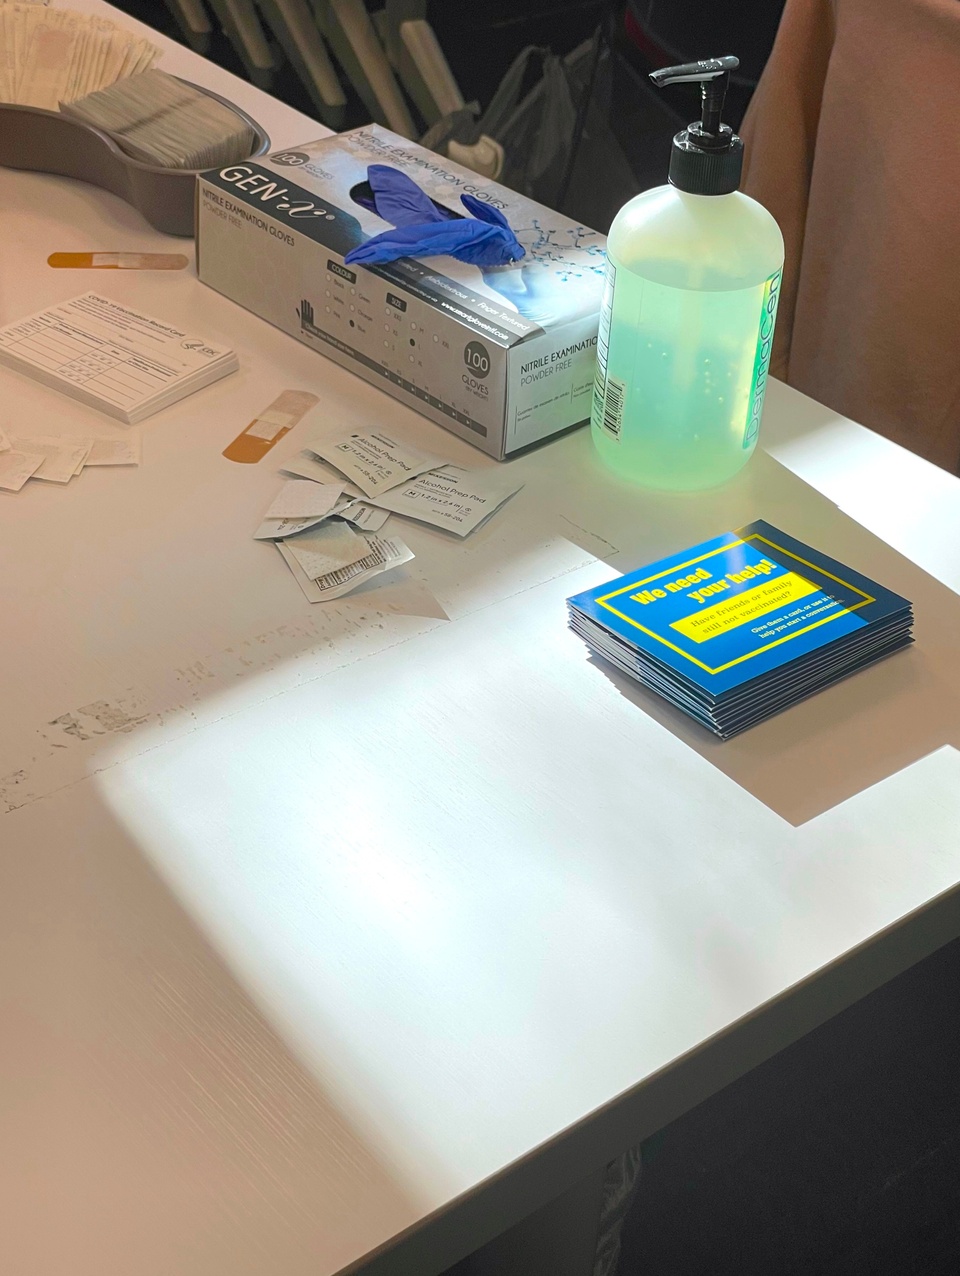 A stack of blue card holders on a desk at a vaccination event. Surrounded by a bottle of hand sanitizer, bandaids, a box of gloves and miscellaneous papers.